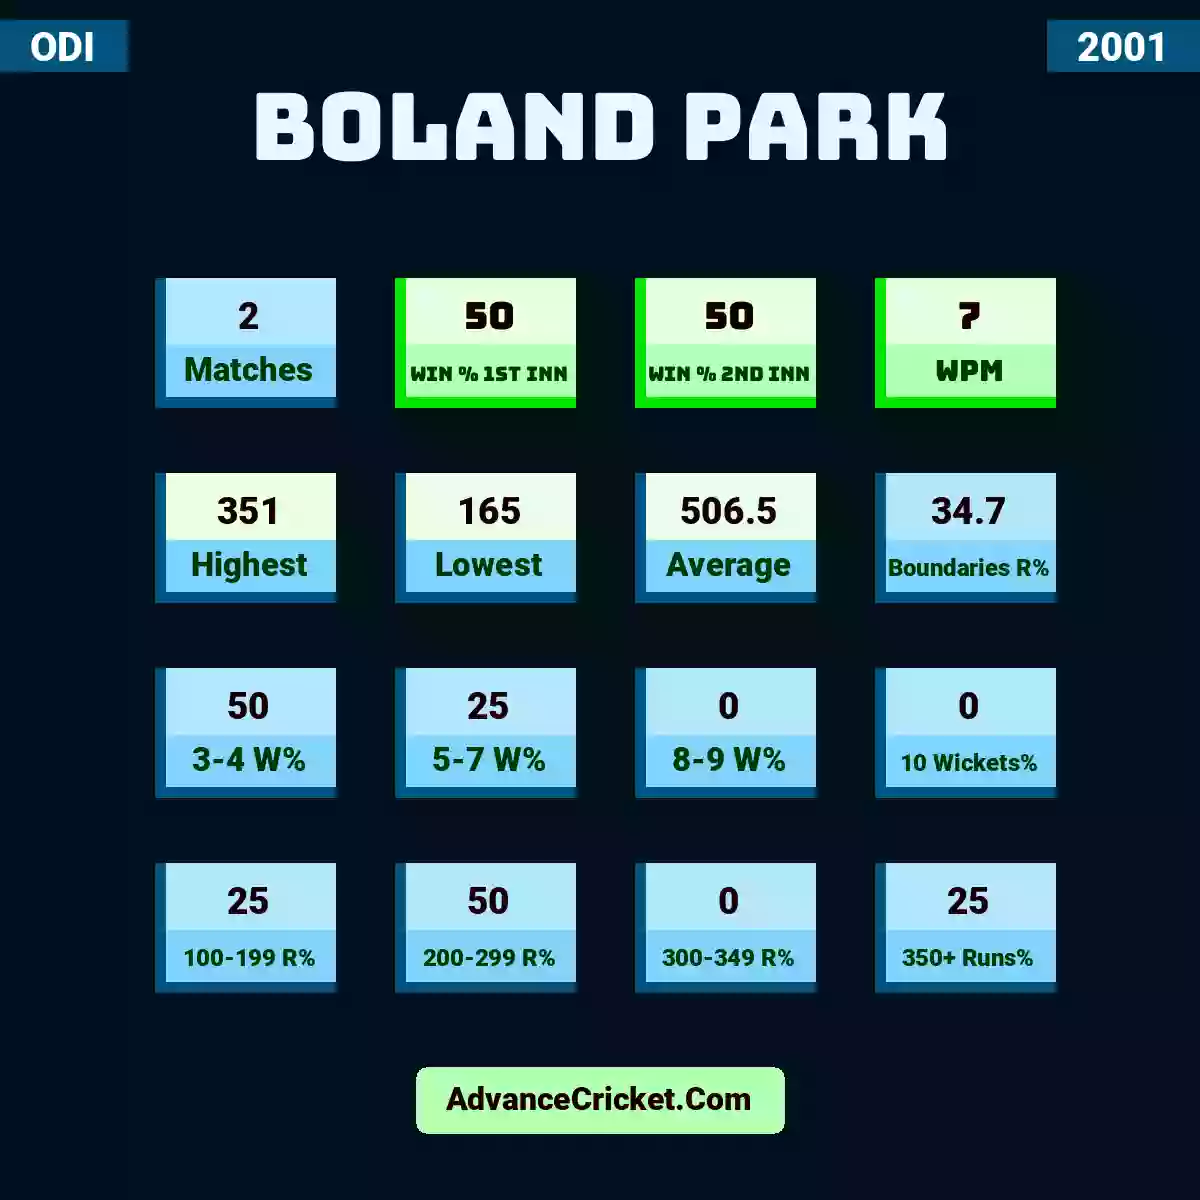 Image showing Boland Park with Matches: 2, Win % 1st Inn: 50, Win % 2nd Inn: 50, WPM: 7, Highest: 351, Lowest: 165, Average: 506.5, Boundaries R%: 34.7, 3-4 W%: 50, 5-7 W%: 25, 8-9 W%: 0, 10 Wickets%: 0, 100-199 R%: 25, 200-299 R%: 50, 300-349 R%: 0, 350+ Runs%: 25.